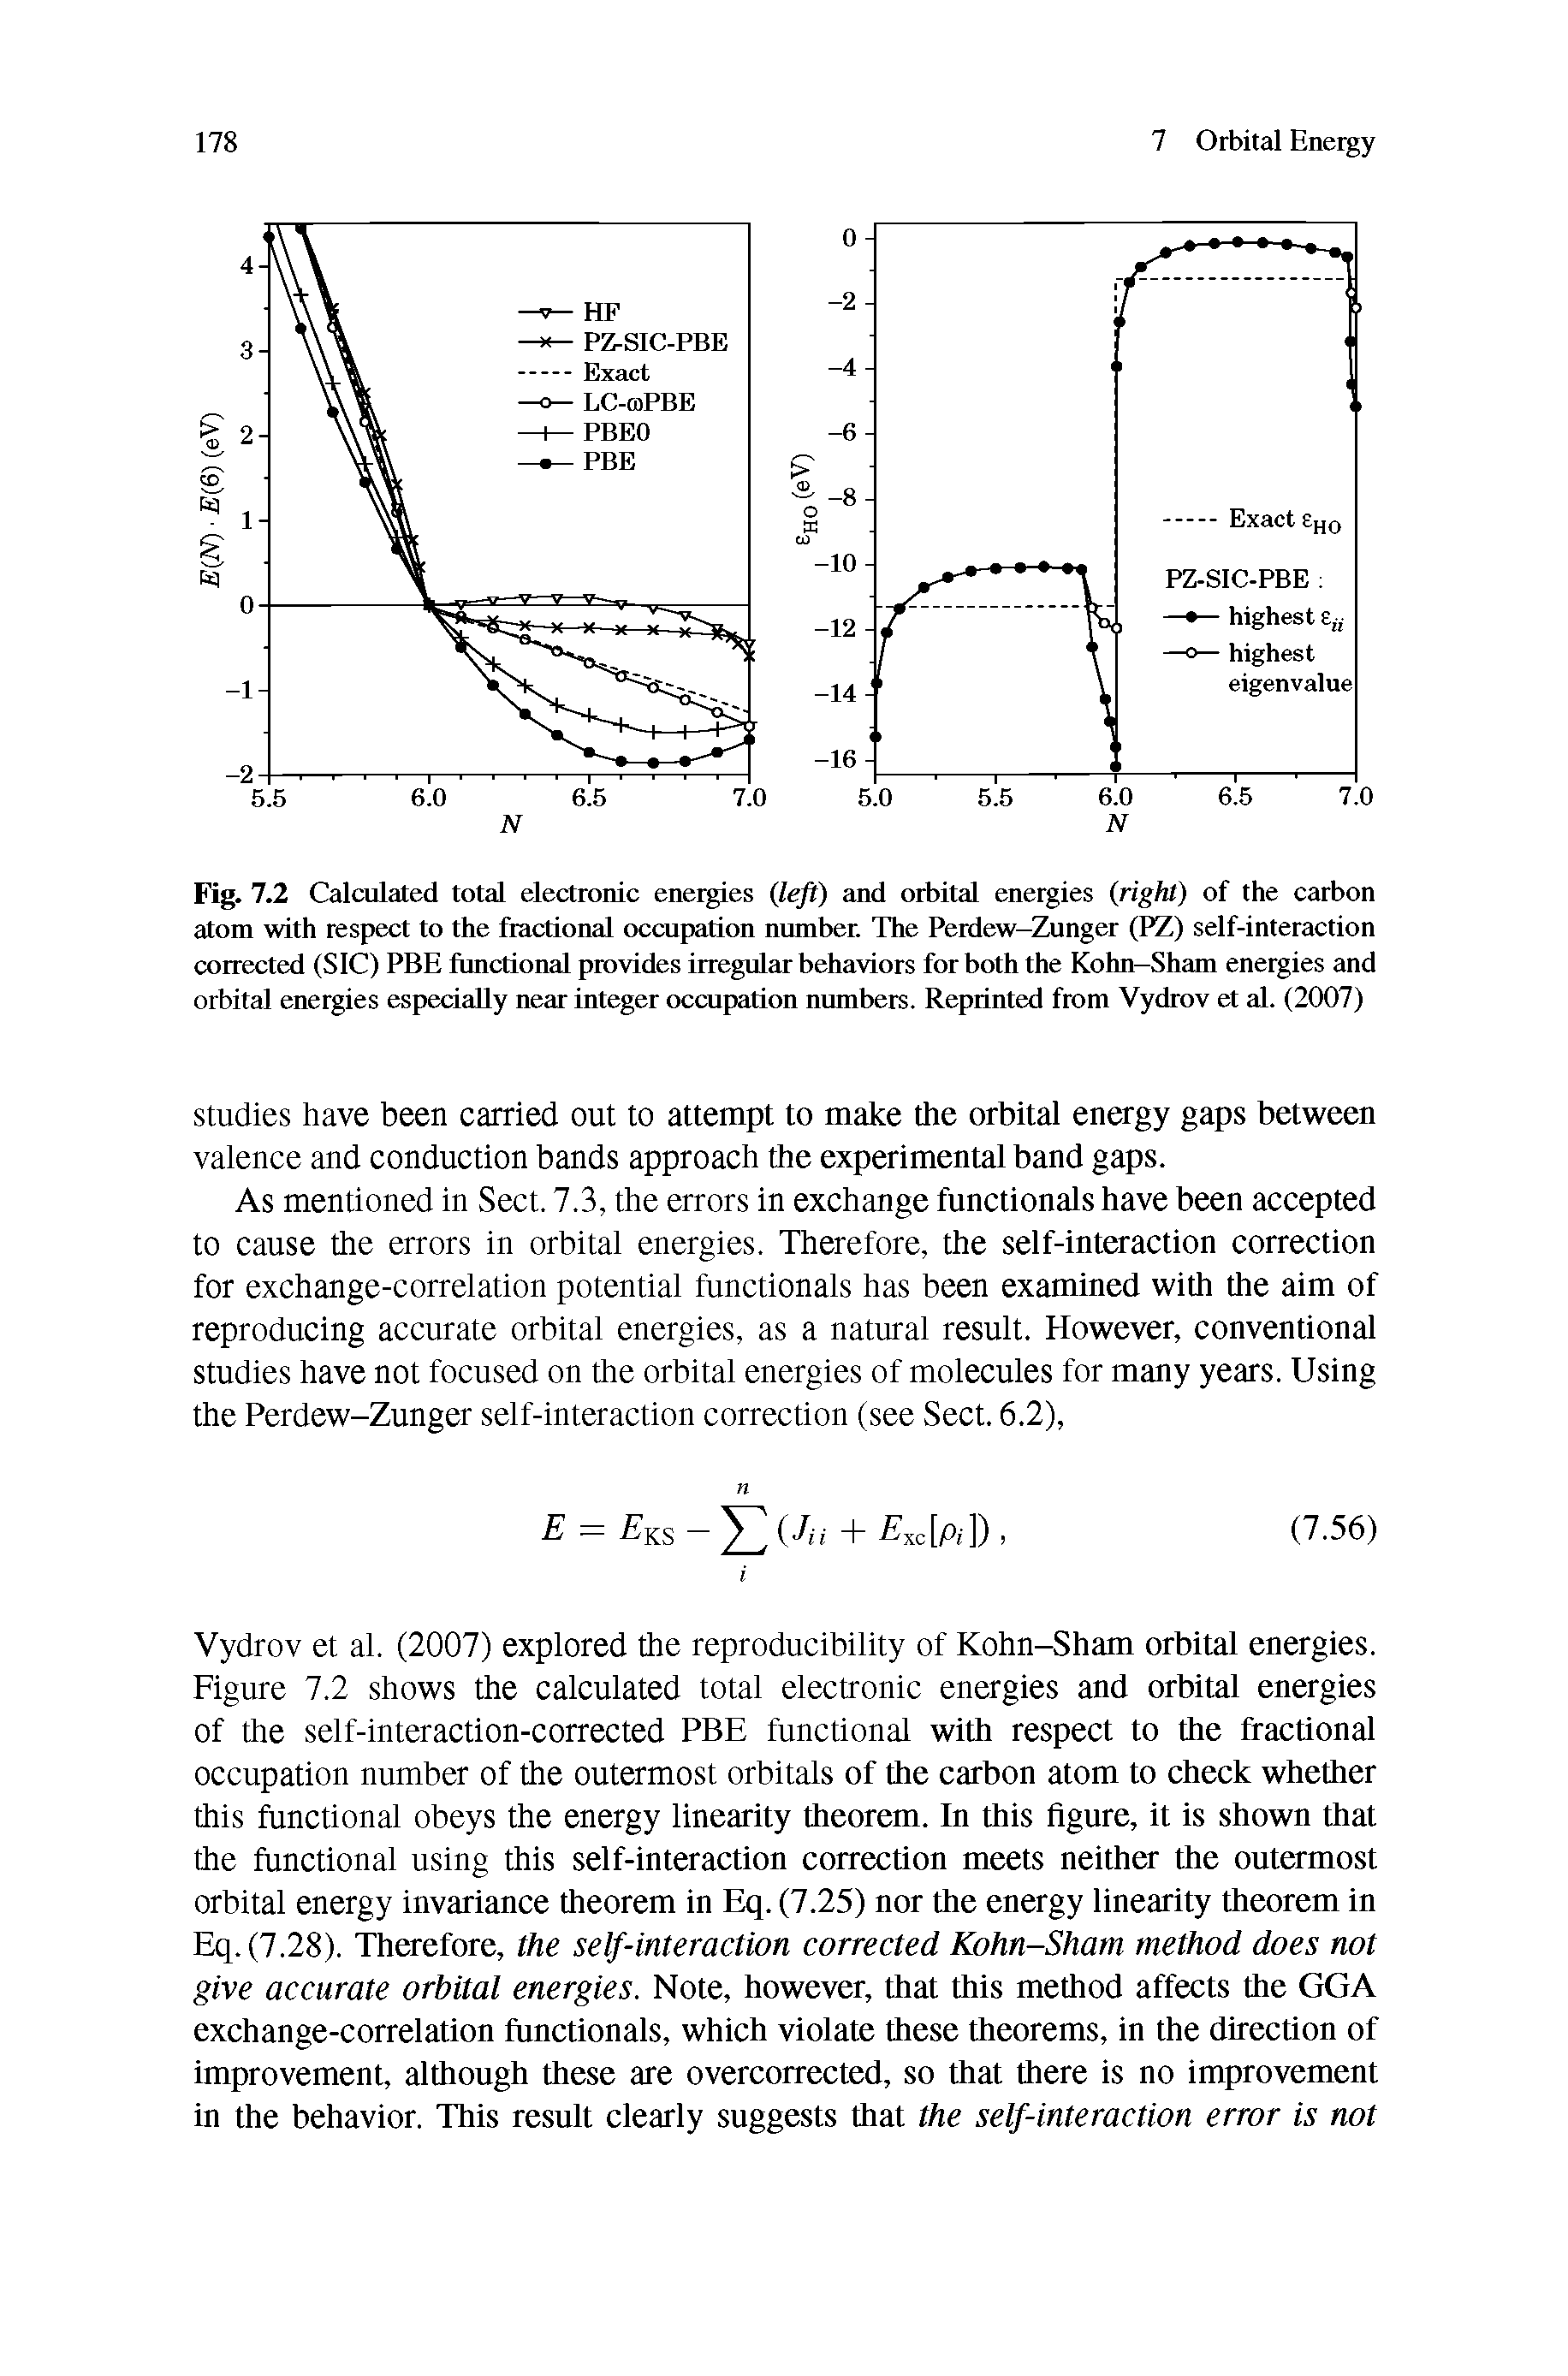 Fig. 7.2 Calculated total electronic eneigies (/ ) and orbital eneigies (right) of the carbon titom with respect to the fractional occupation number The Peidew-Zunger (PZ) self-interaction corrected (SIC) PBE functional provides irregular behaviors for both the Kohn-Sham energies and orbital energies especially near integer occupation numbers. Reprinted from Vydrov et al. (2007)...